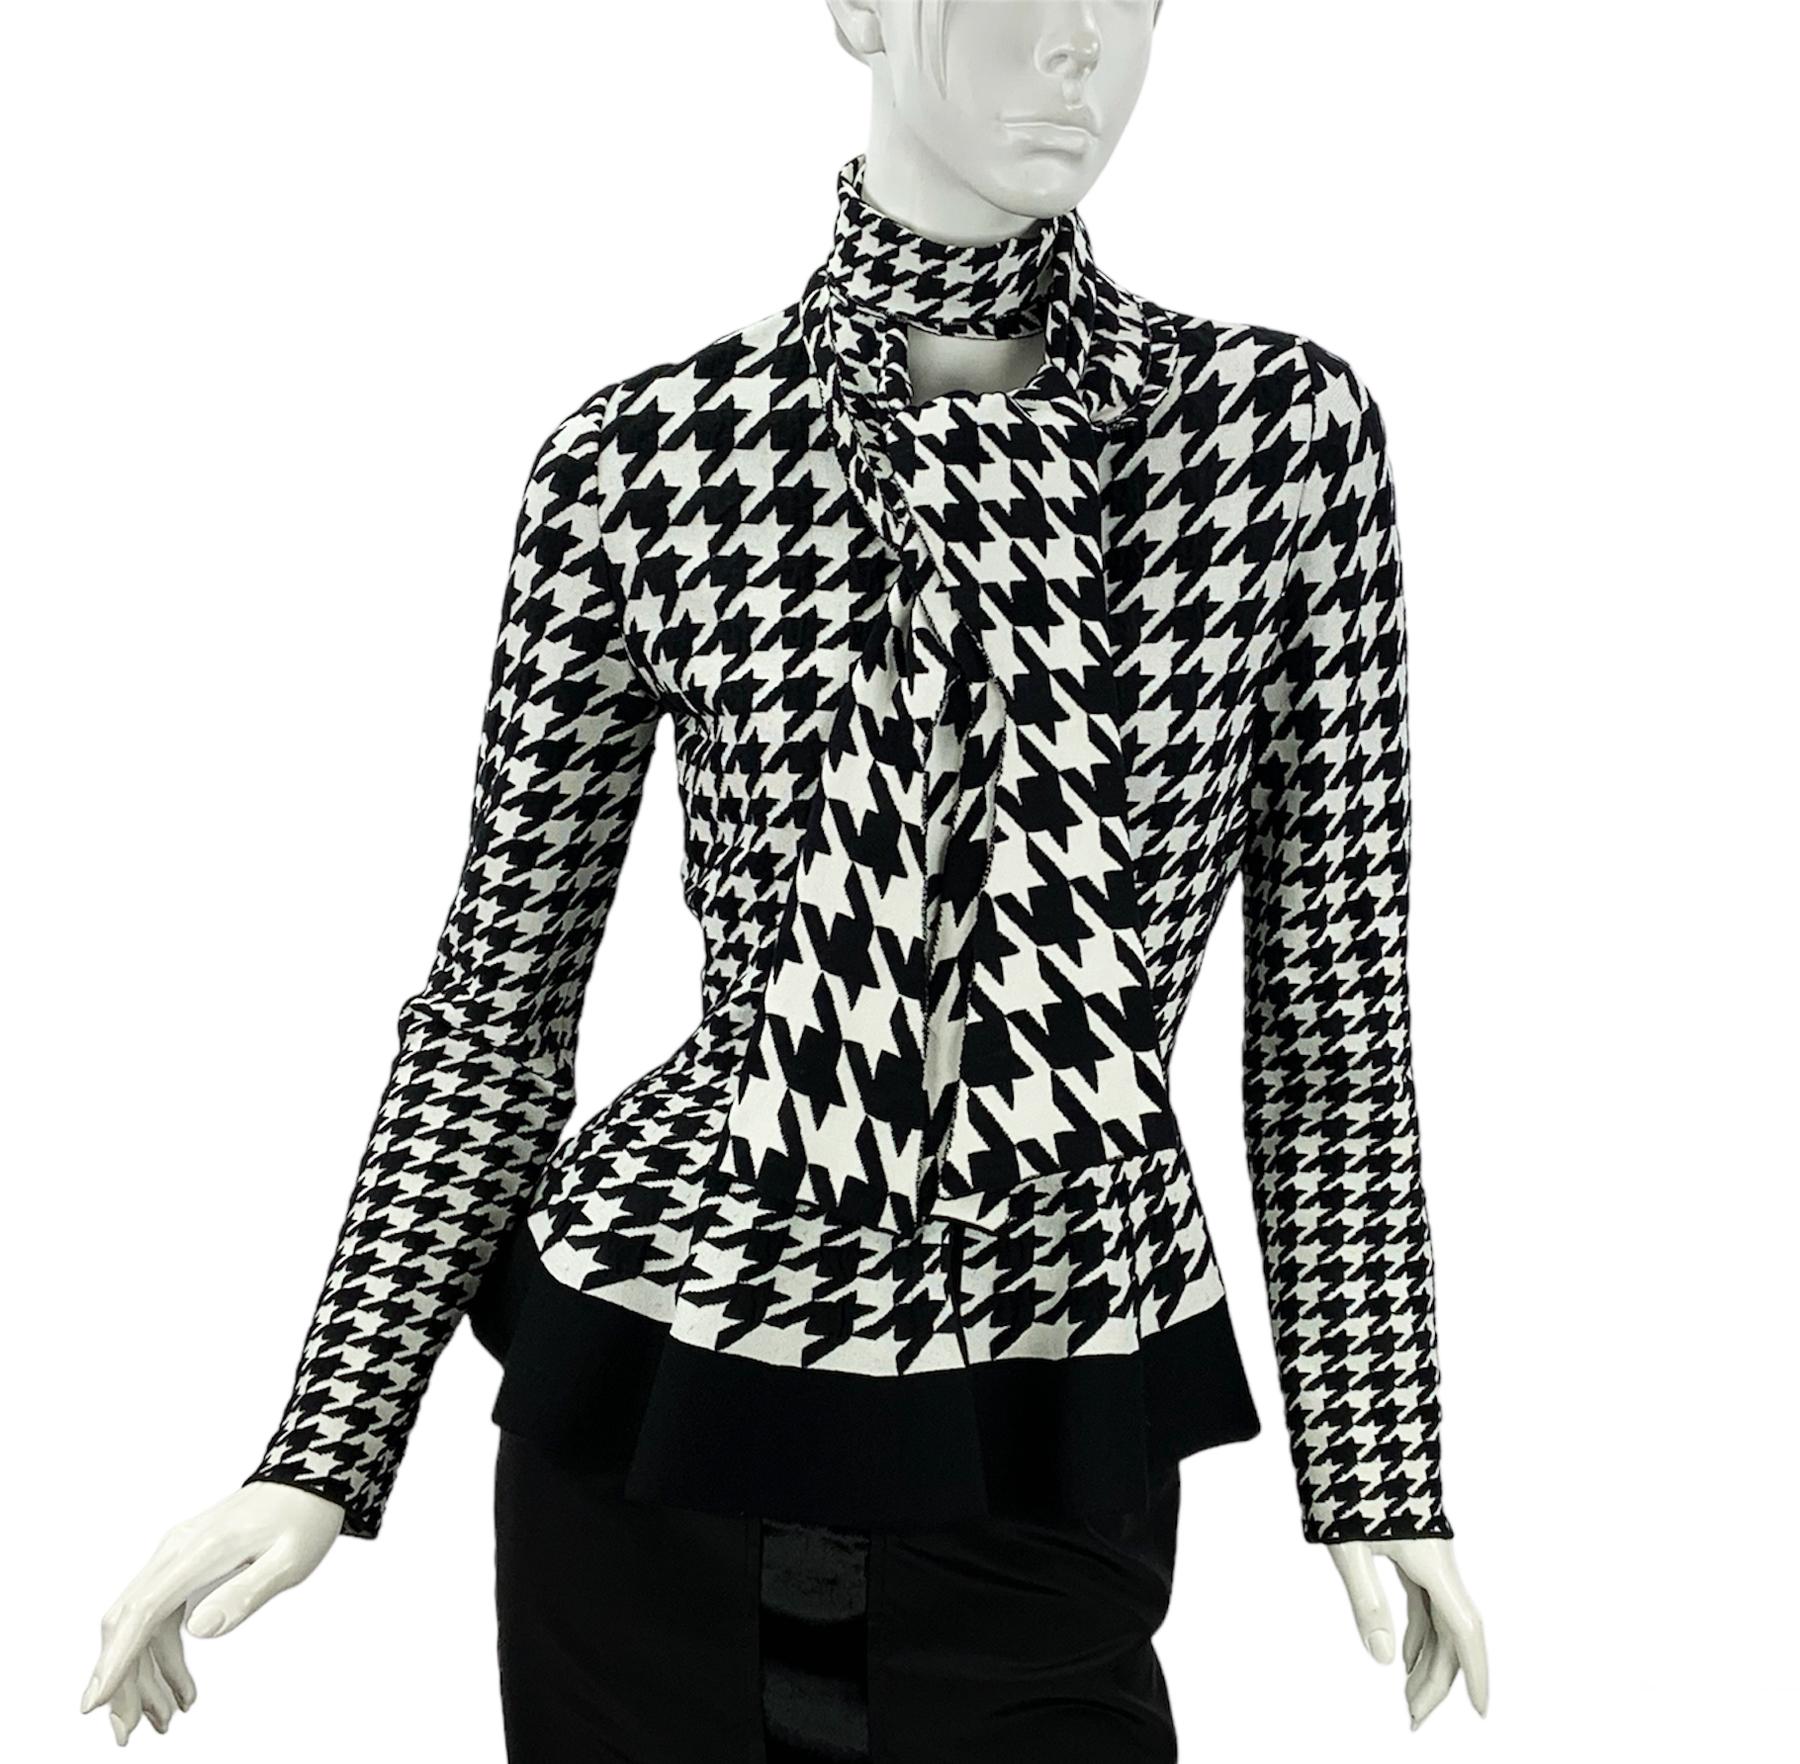 Alexander McQueen Houndstooth Pattern Knit Top Cardigan - Statement Piece!
One of the Most Timeless Iconic Pattern in Fashion!
Italian size - L ( please check measurements ).
Famous Alexander McQueen Houndstooth Print, 
Attached on Back Scarf Can be